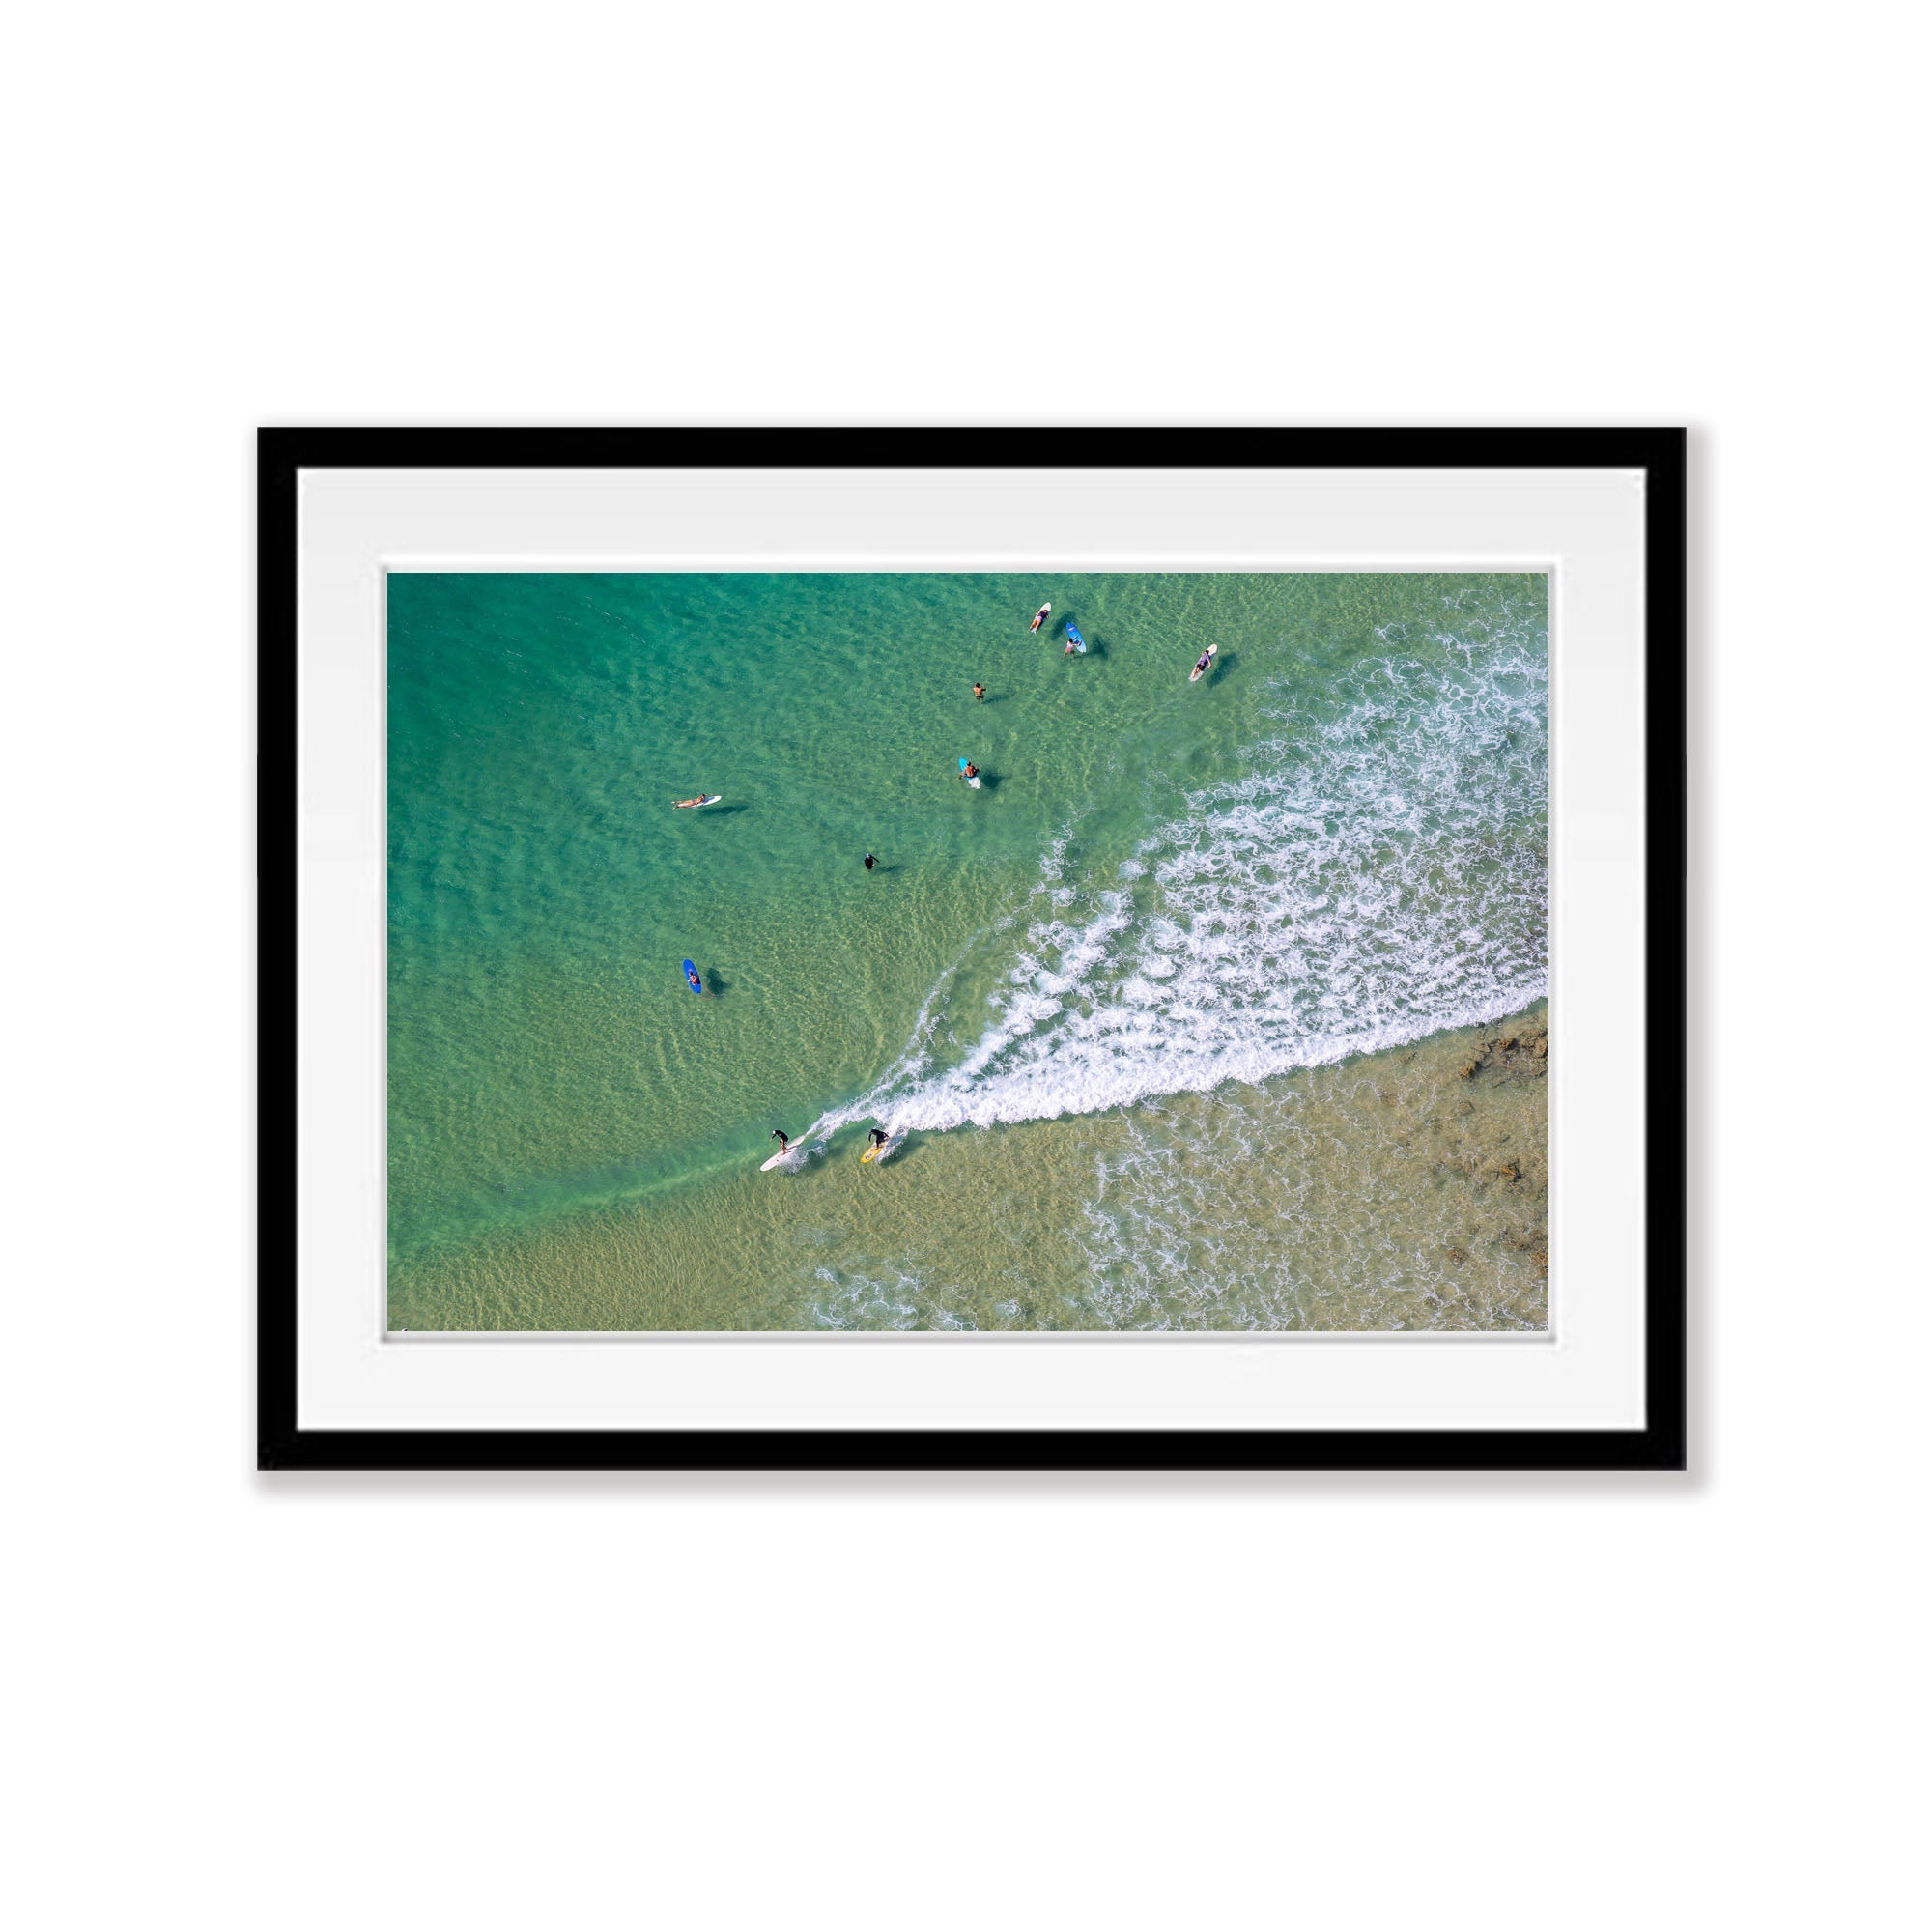 Surfers from above No.3, Noosa National Park, Queensland